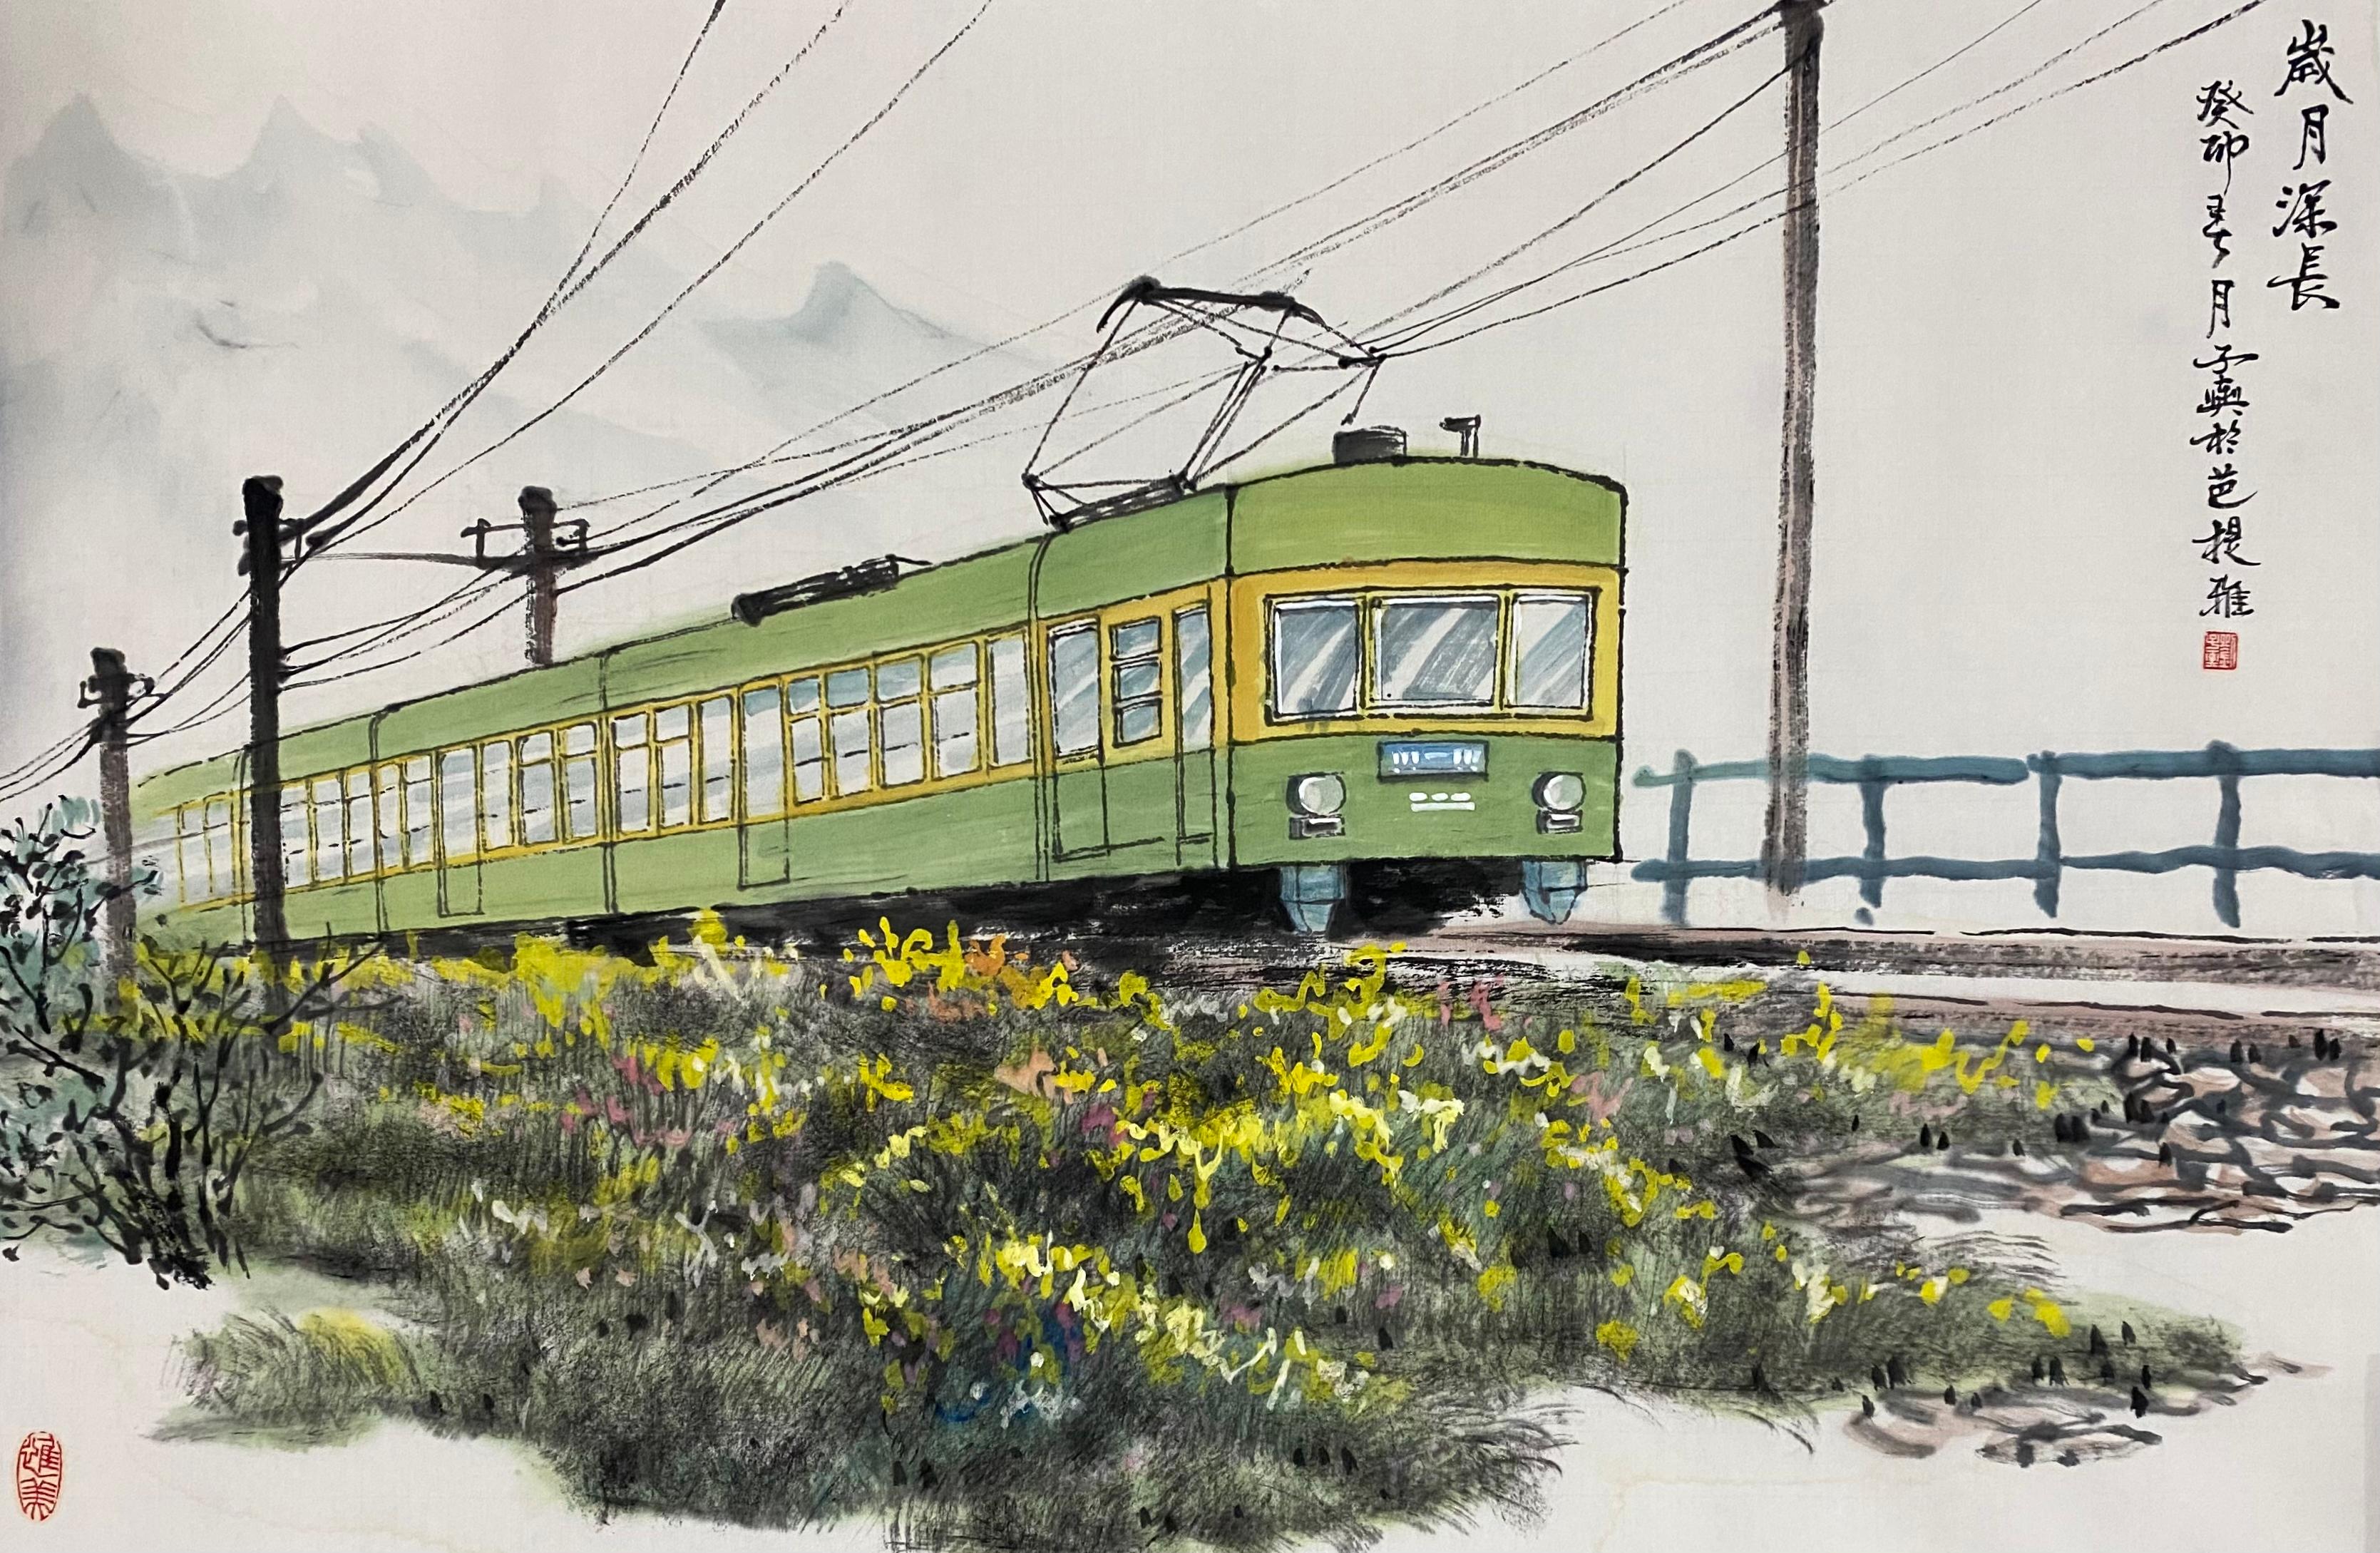 Chinese Contemporary Art by Liu Ziyu - The Train is Coming from Afar